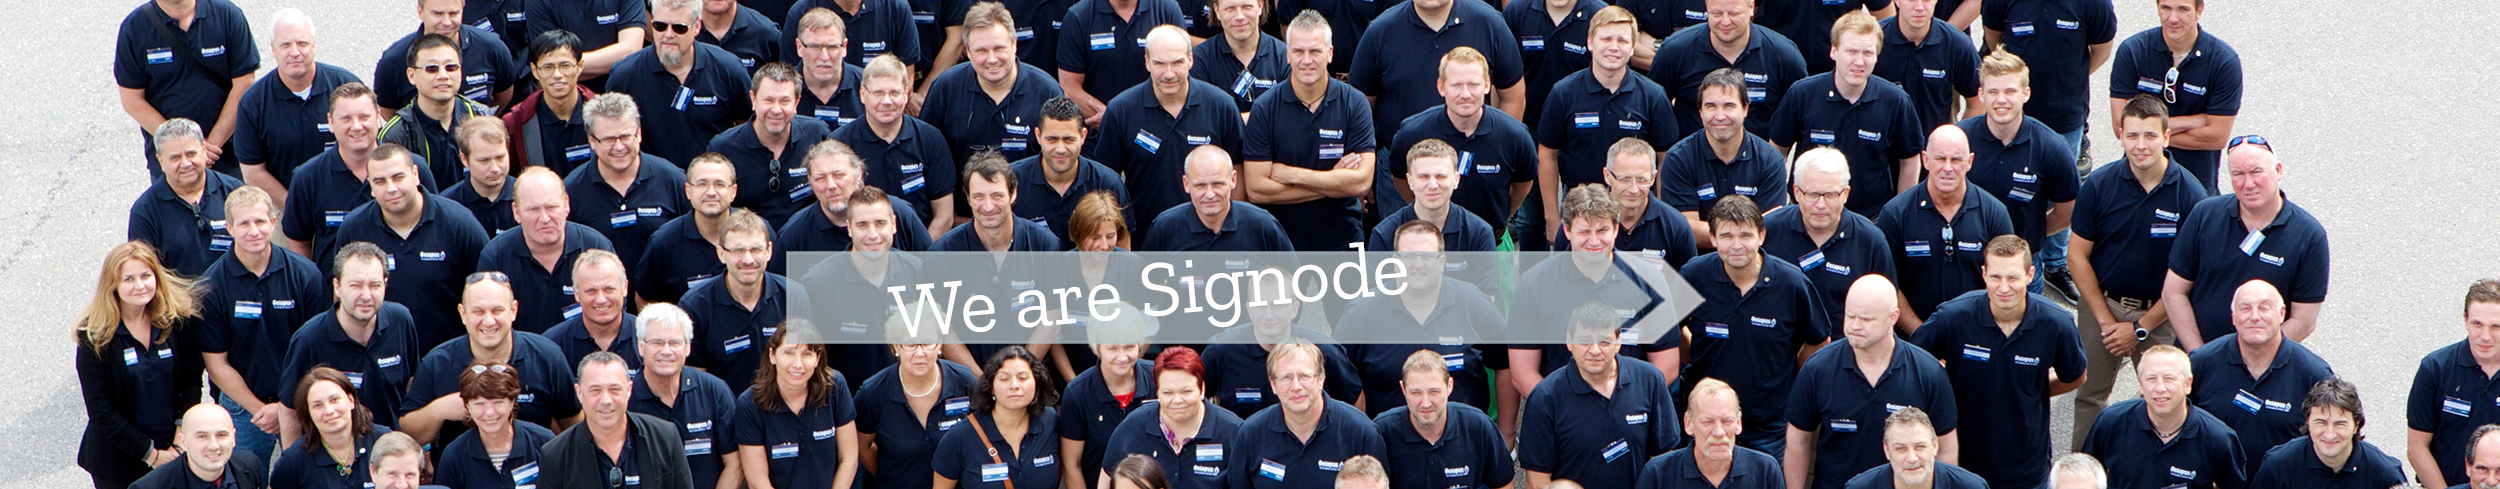 Signode people